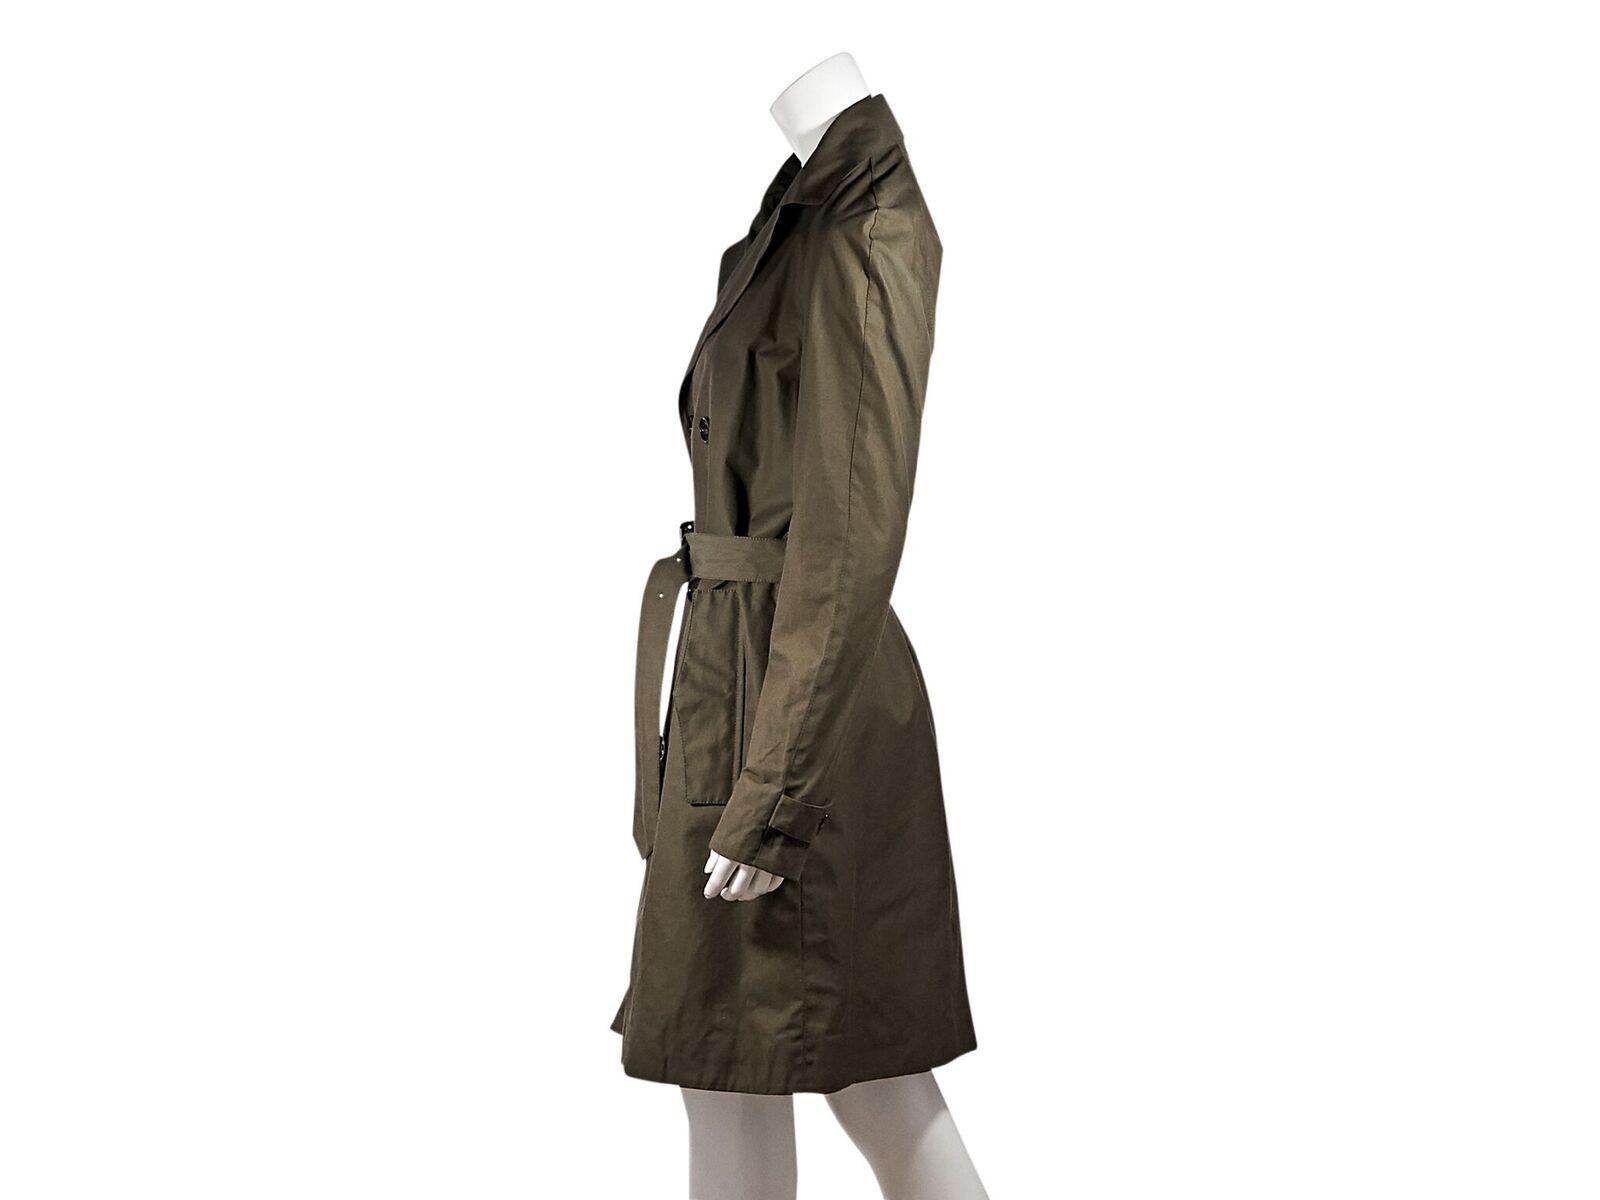 Product details:  Olive green trench coat by Burberry Prorsum.  Notched lapel.  Long sleeves.  Double-breasted button-front closure.  Adjustable belted waist.  Waist snap flap pockets.  Back center hem vent.  38